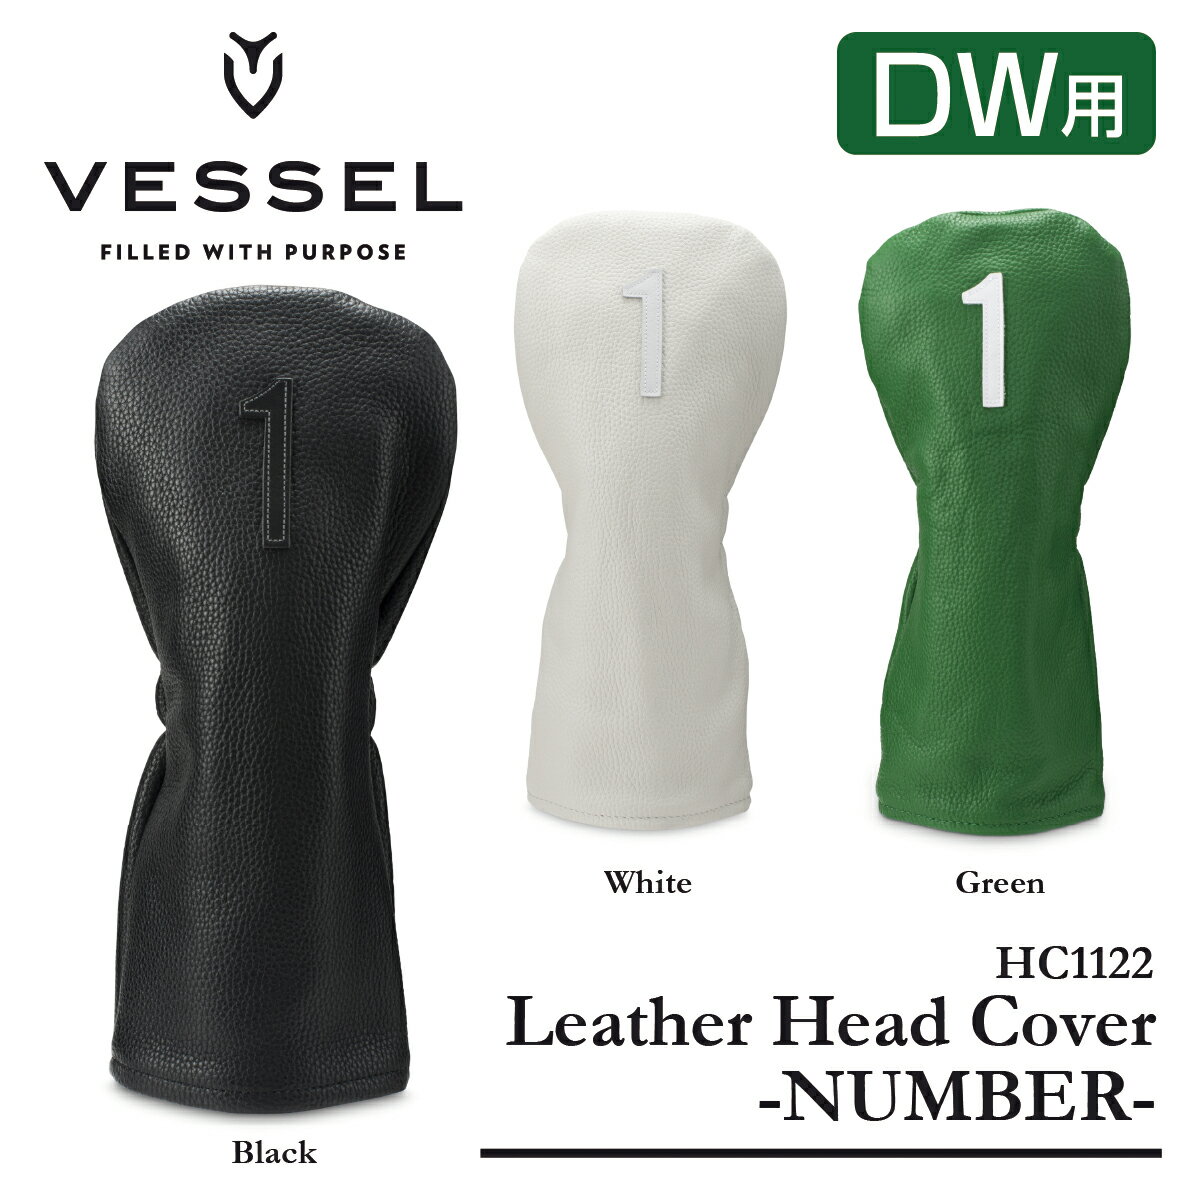 _Leather Head Cover -NUMBER- DW_レザー ヘッドカバー -ナンバー- DW用__